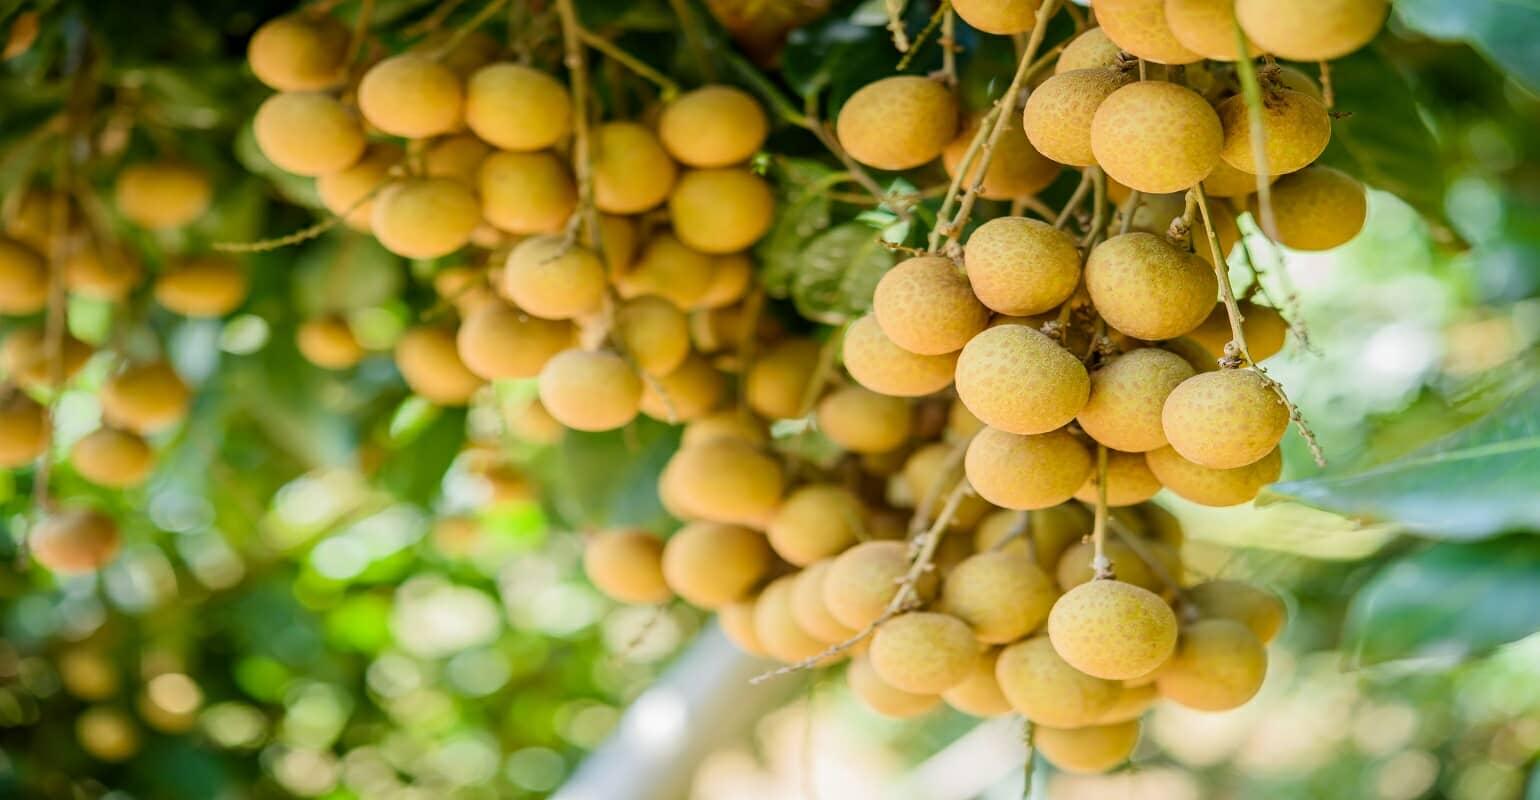 Longan and Safe agricultural products of Son La were warmly welcomed by Hanoi customers